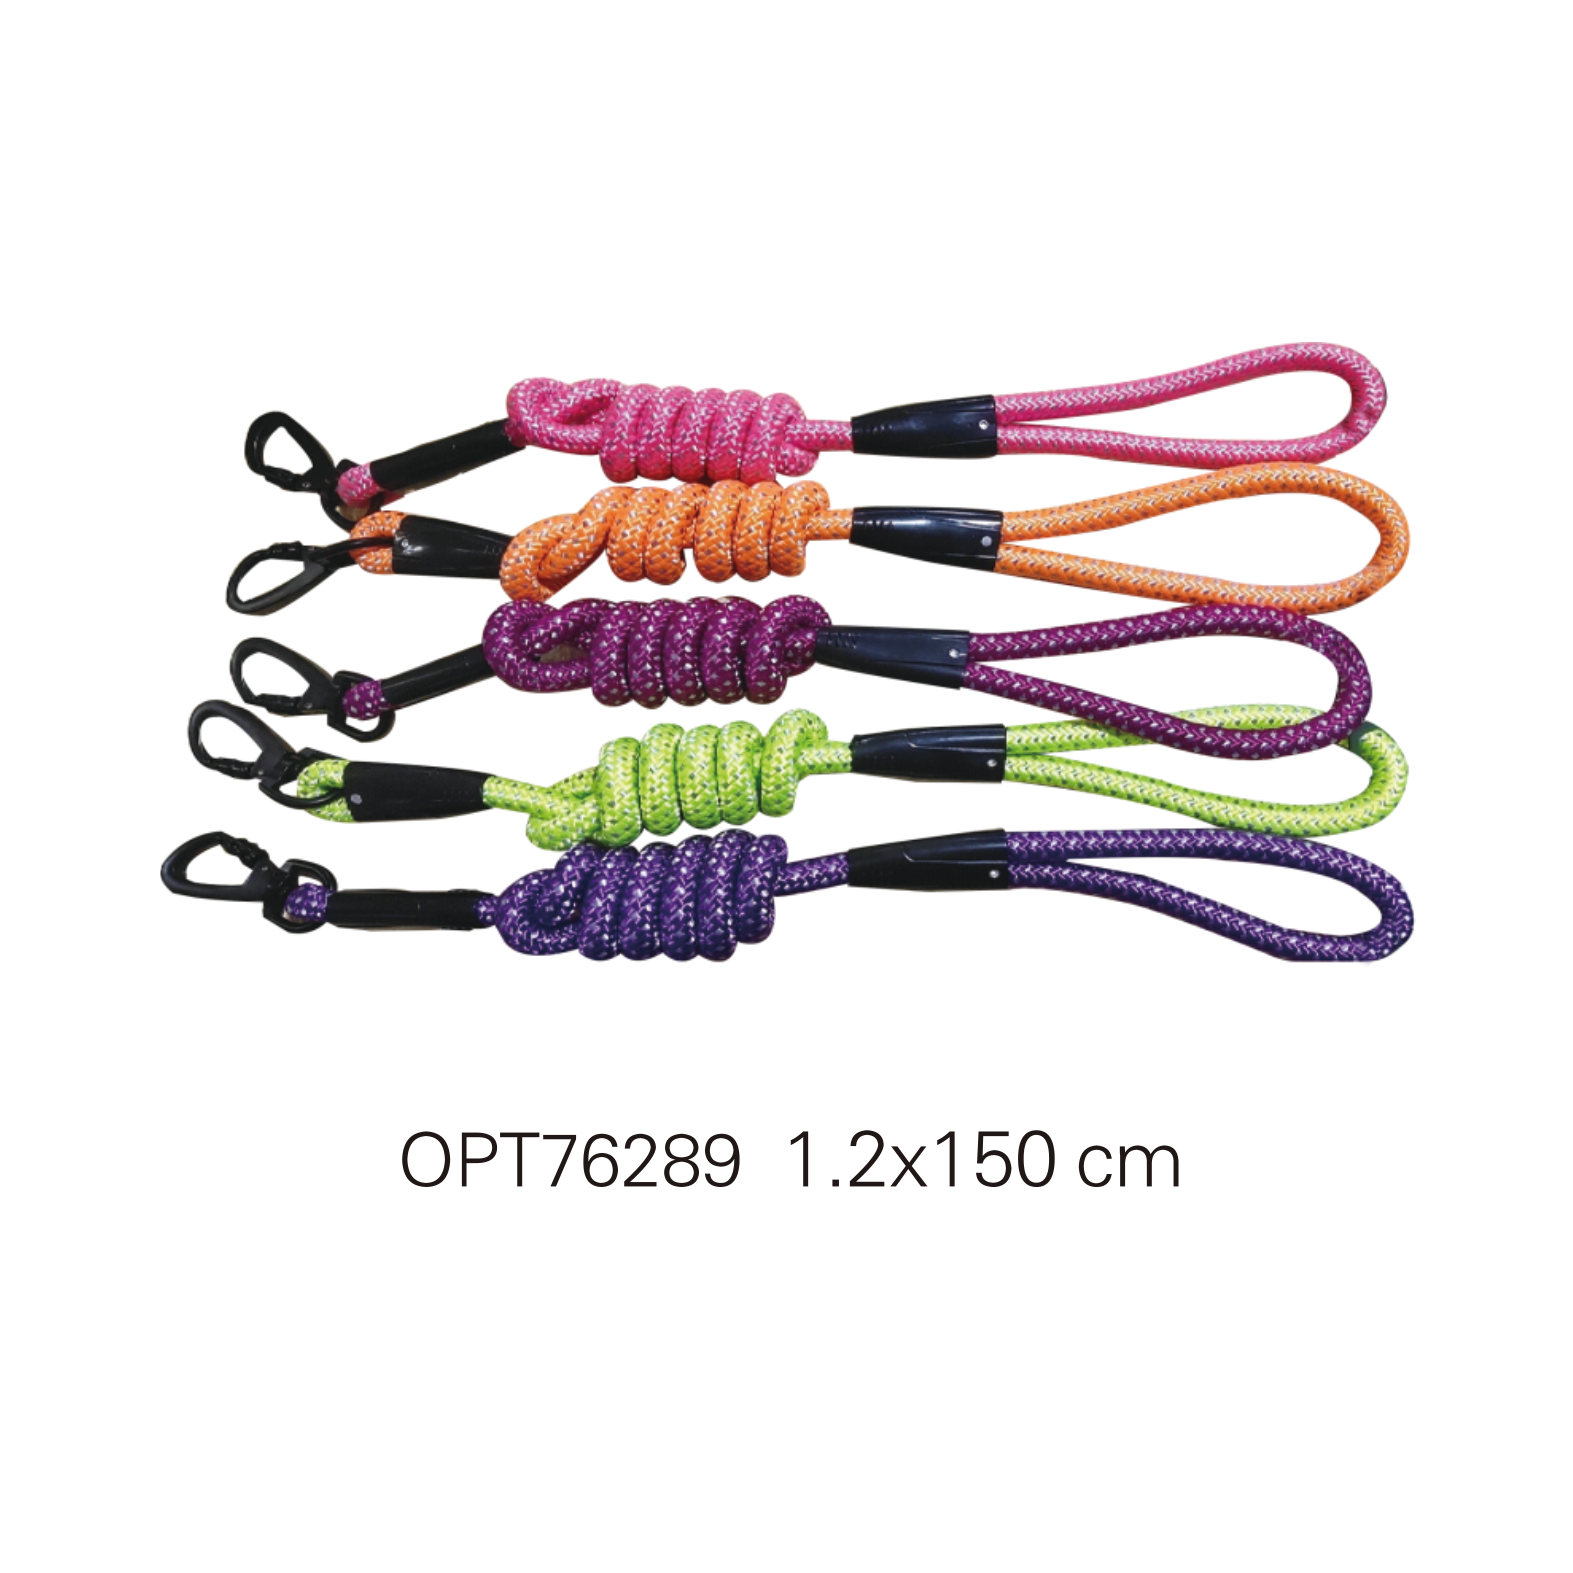 OPT76289 Pet leashes